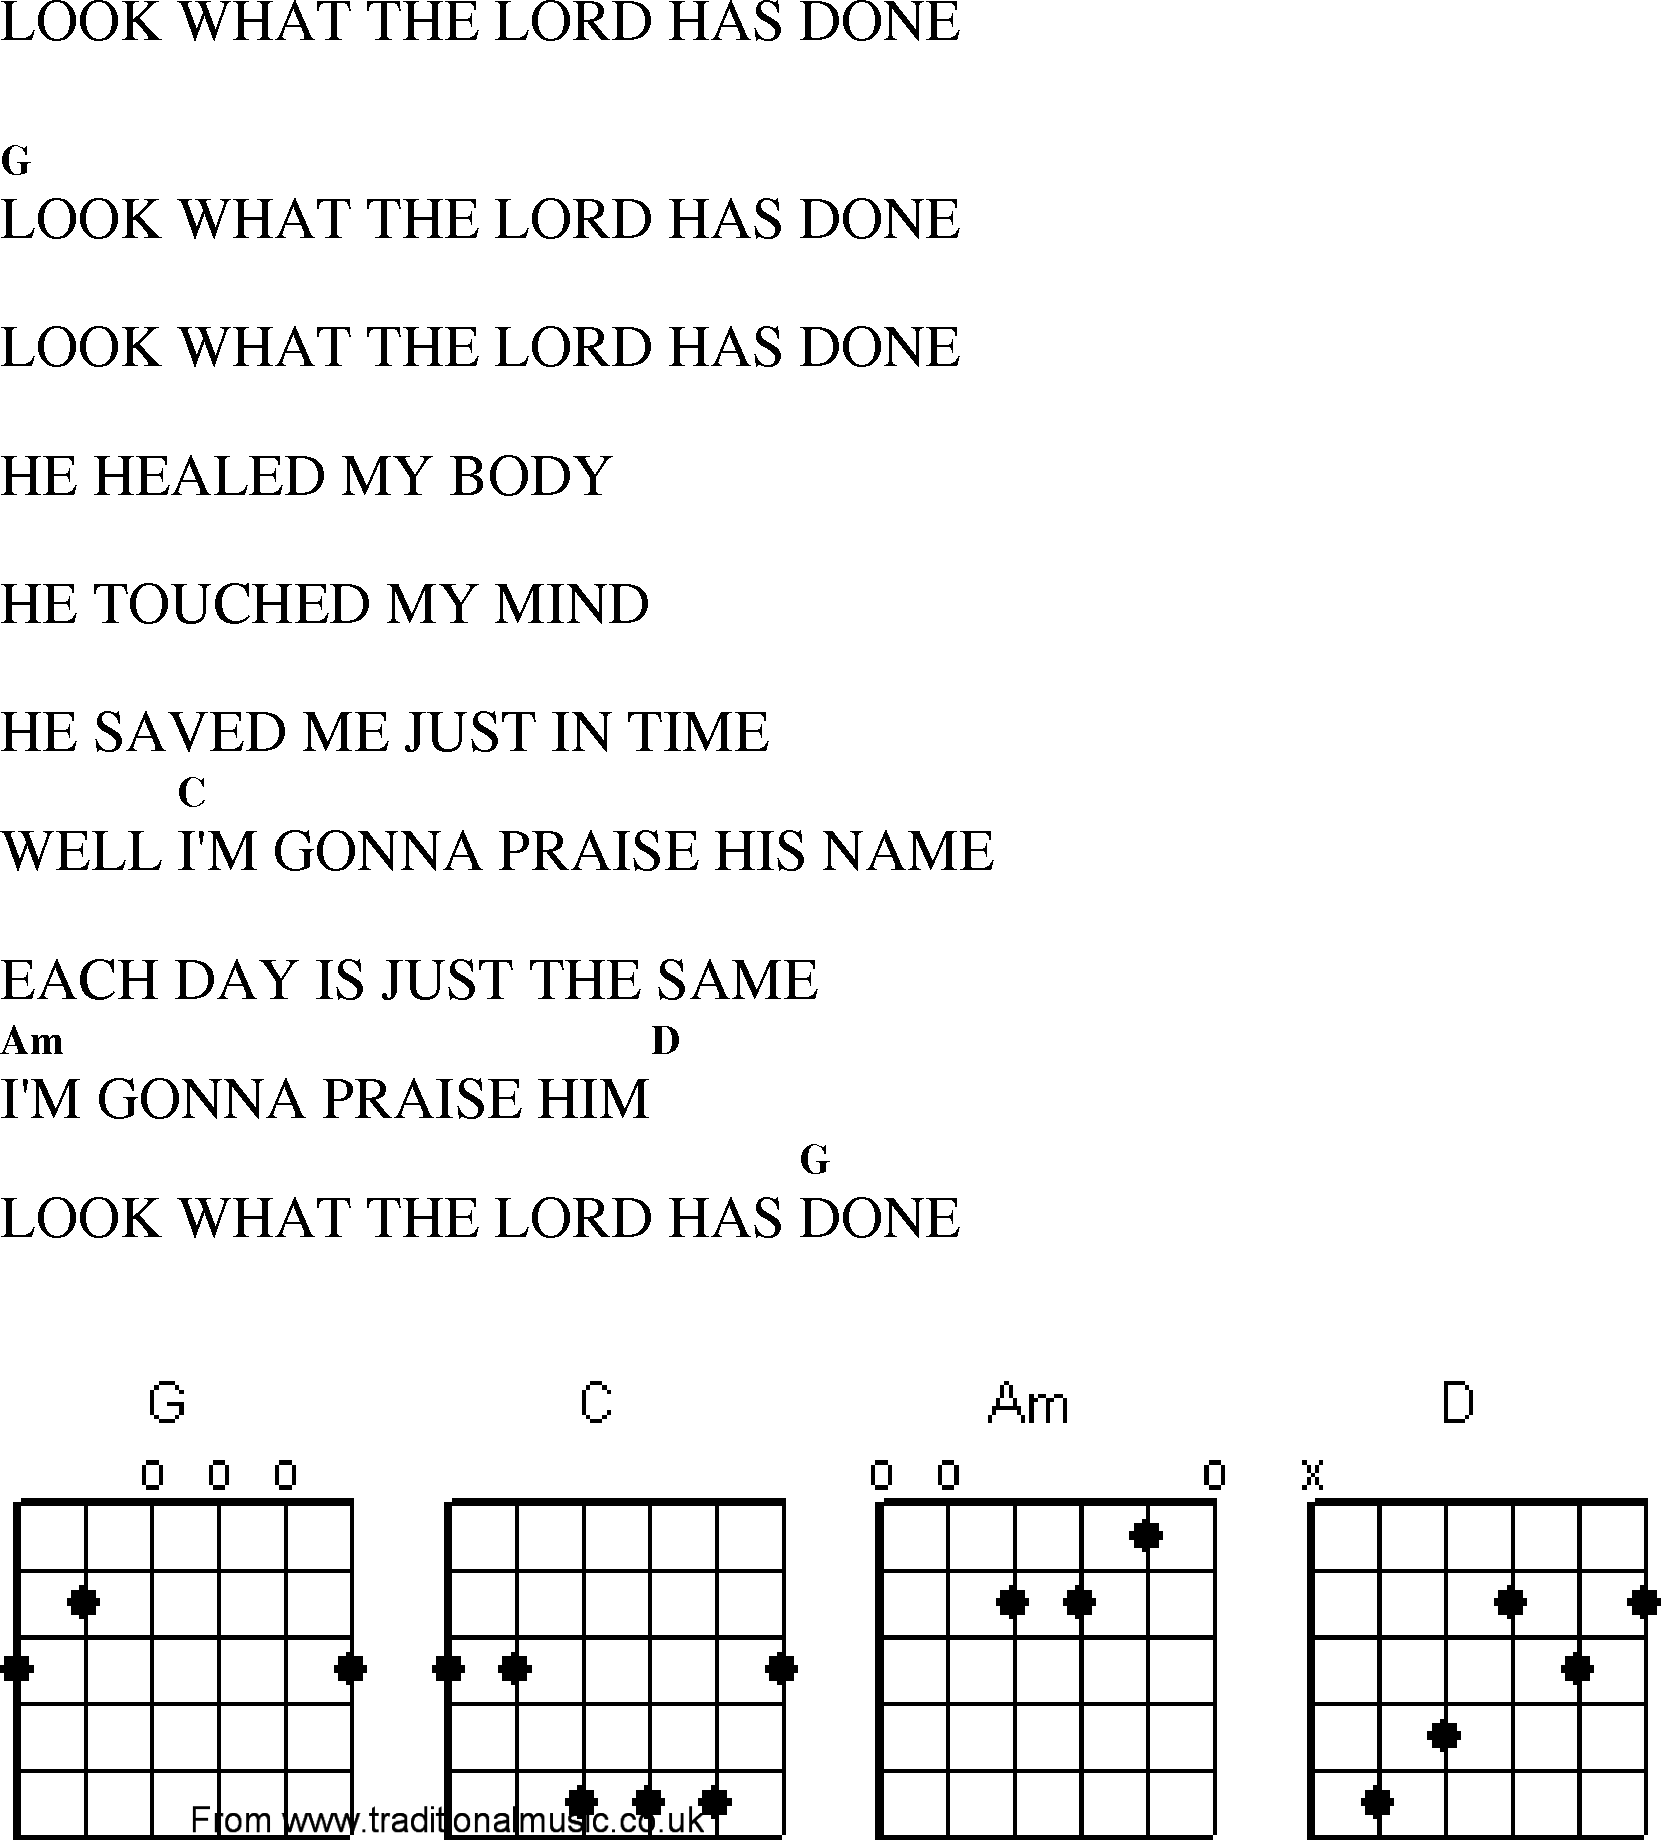 Gospel Song: look_what_the_lord_has_done, lyrics and chords.